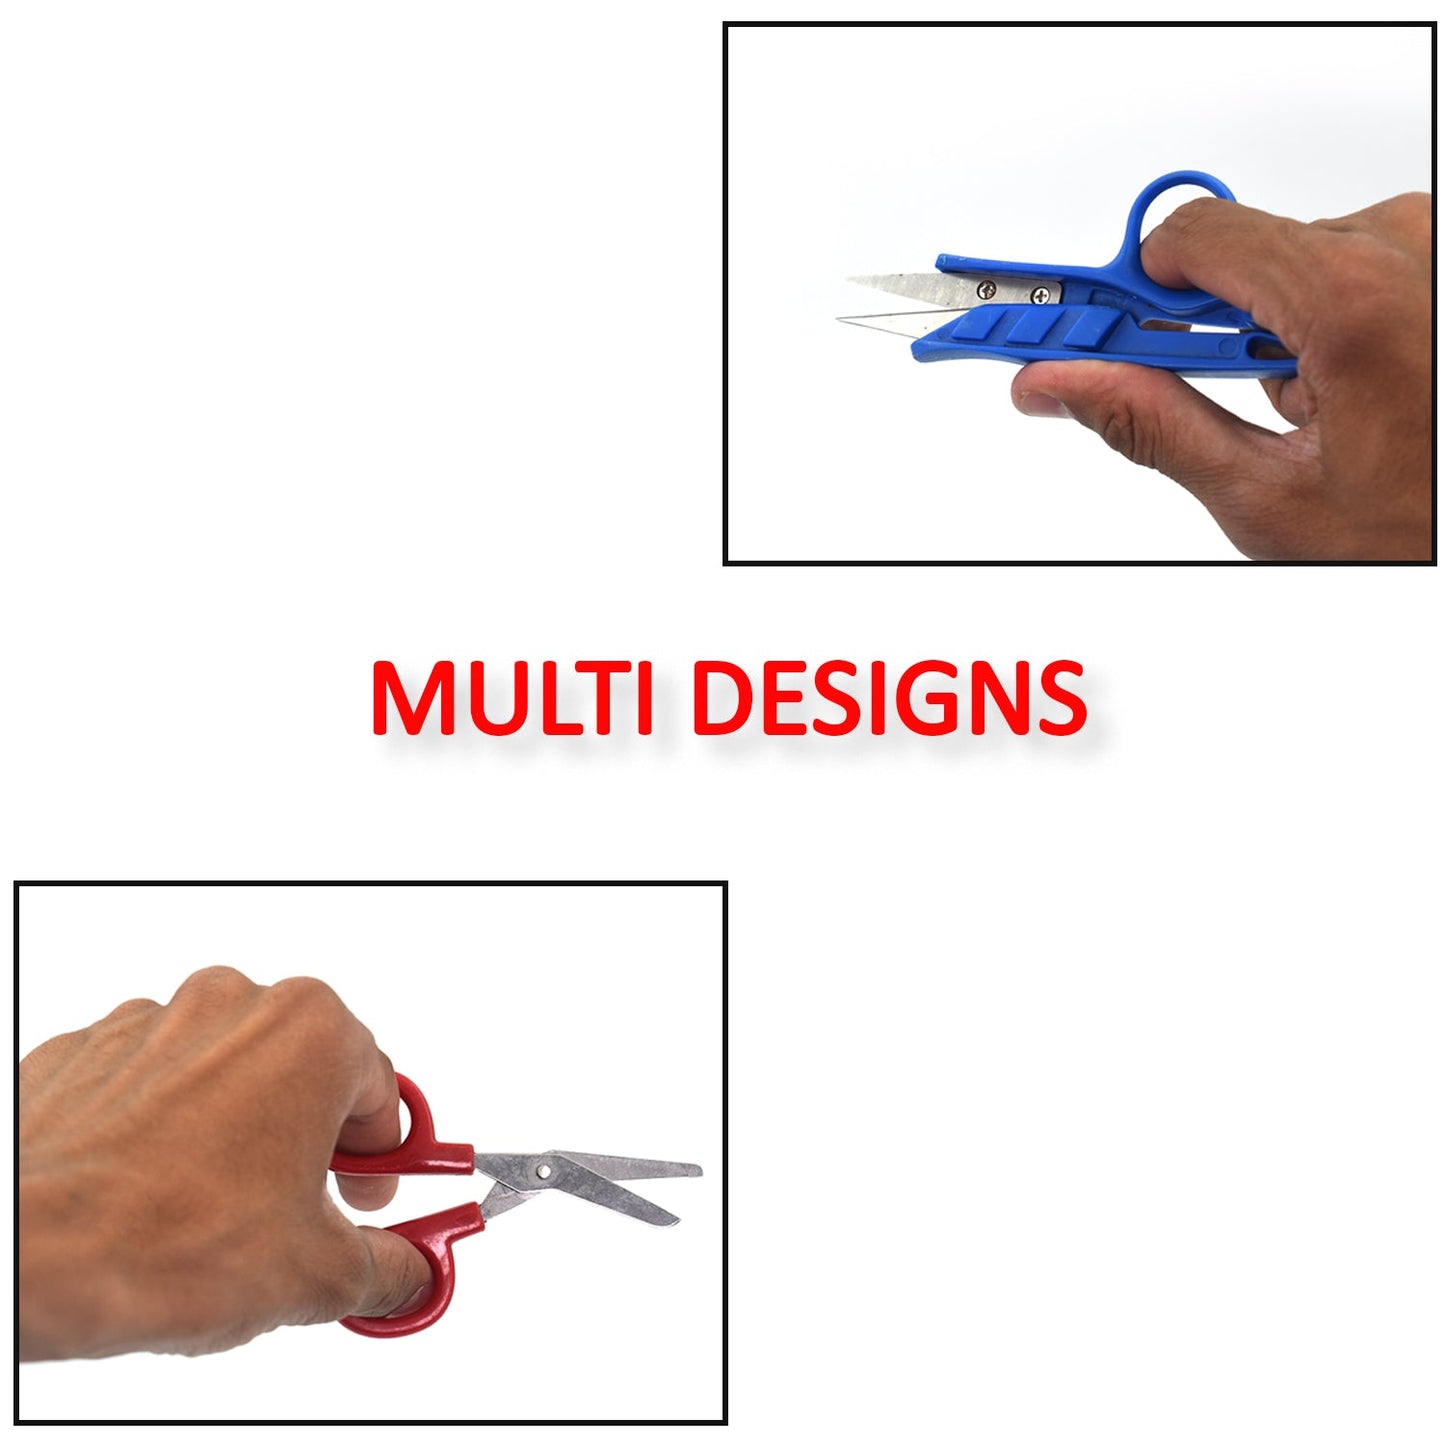 7626 mini scissors for cutting and designing purposes by student and all etc. 